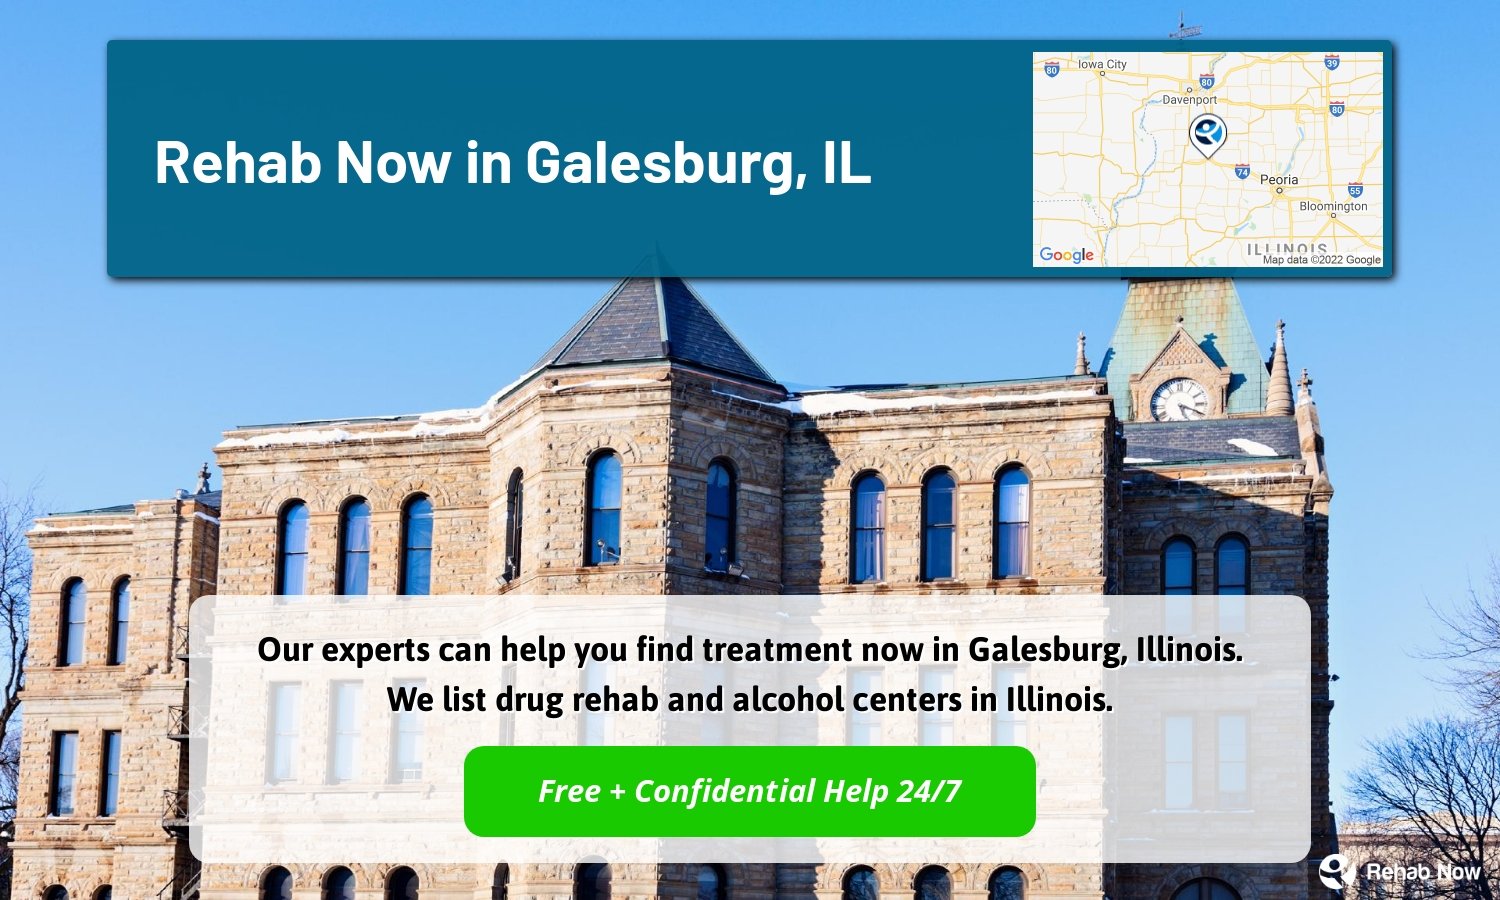 Our experts can help you find treatment now in Galesburg, Illinois. We list drug rehab and alcohol centers in Illinois.